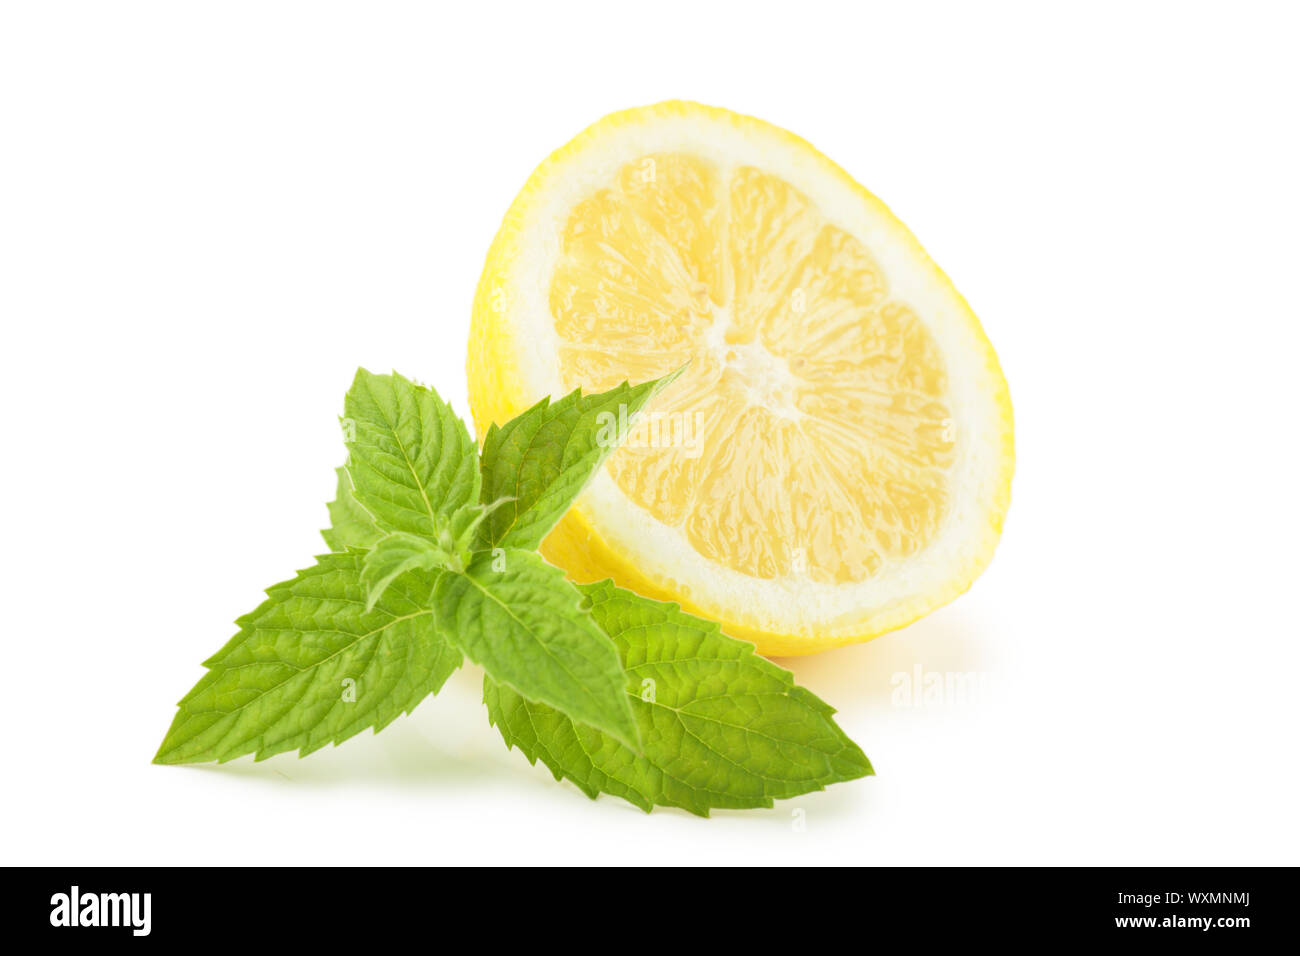 Lemon with mint leaves over white background Stock Photo